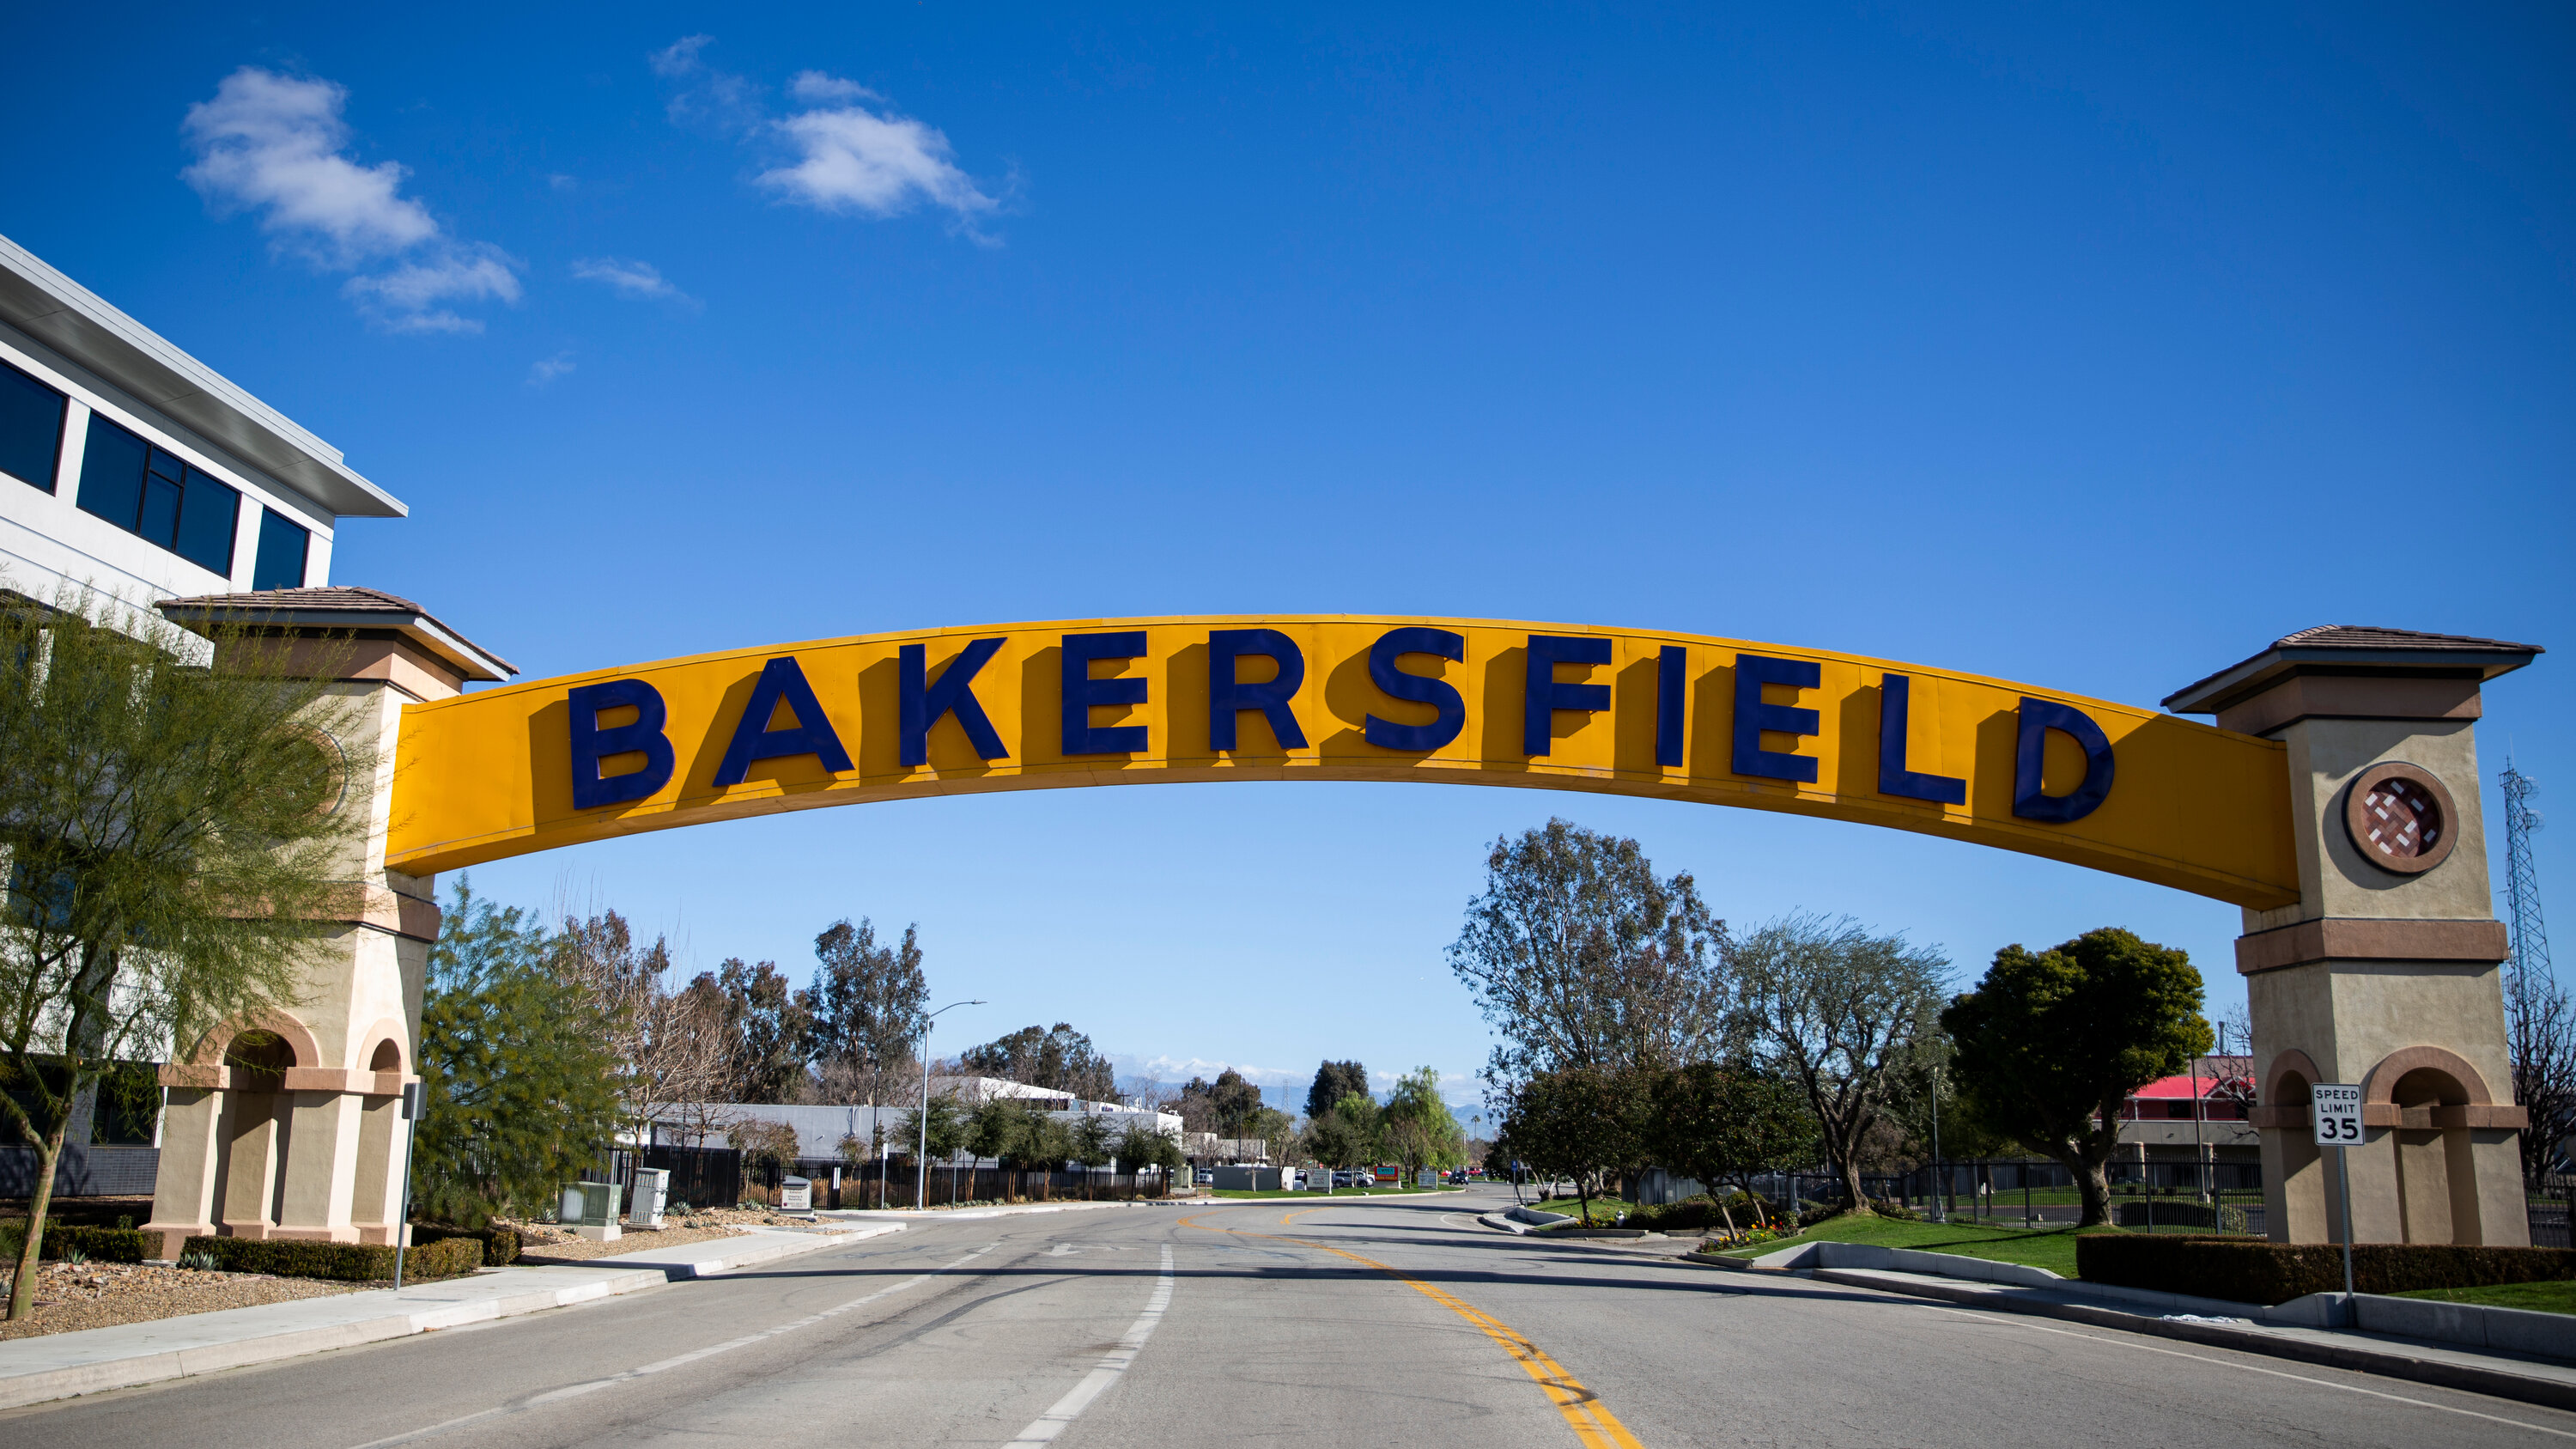 36 Facts About Bakersfield (CA) - Facts.net